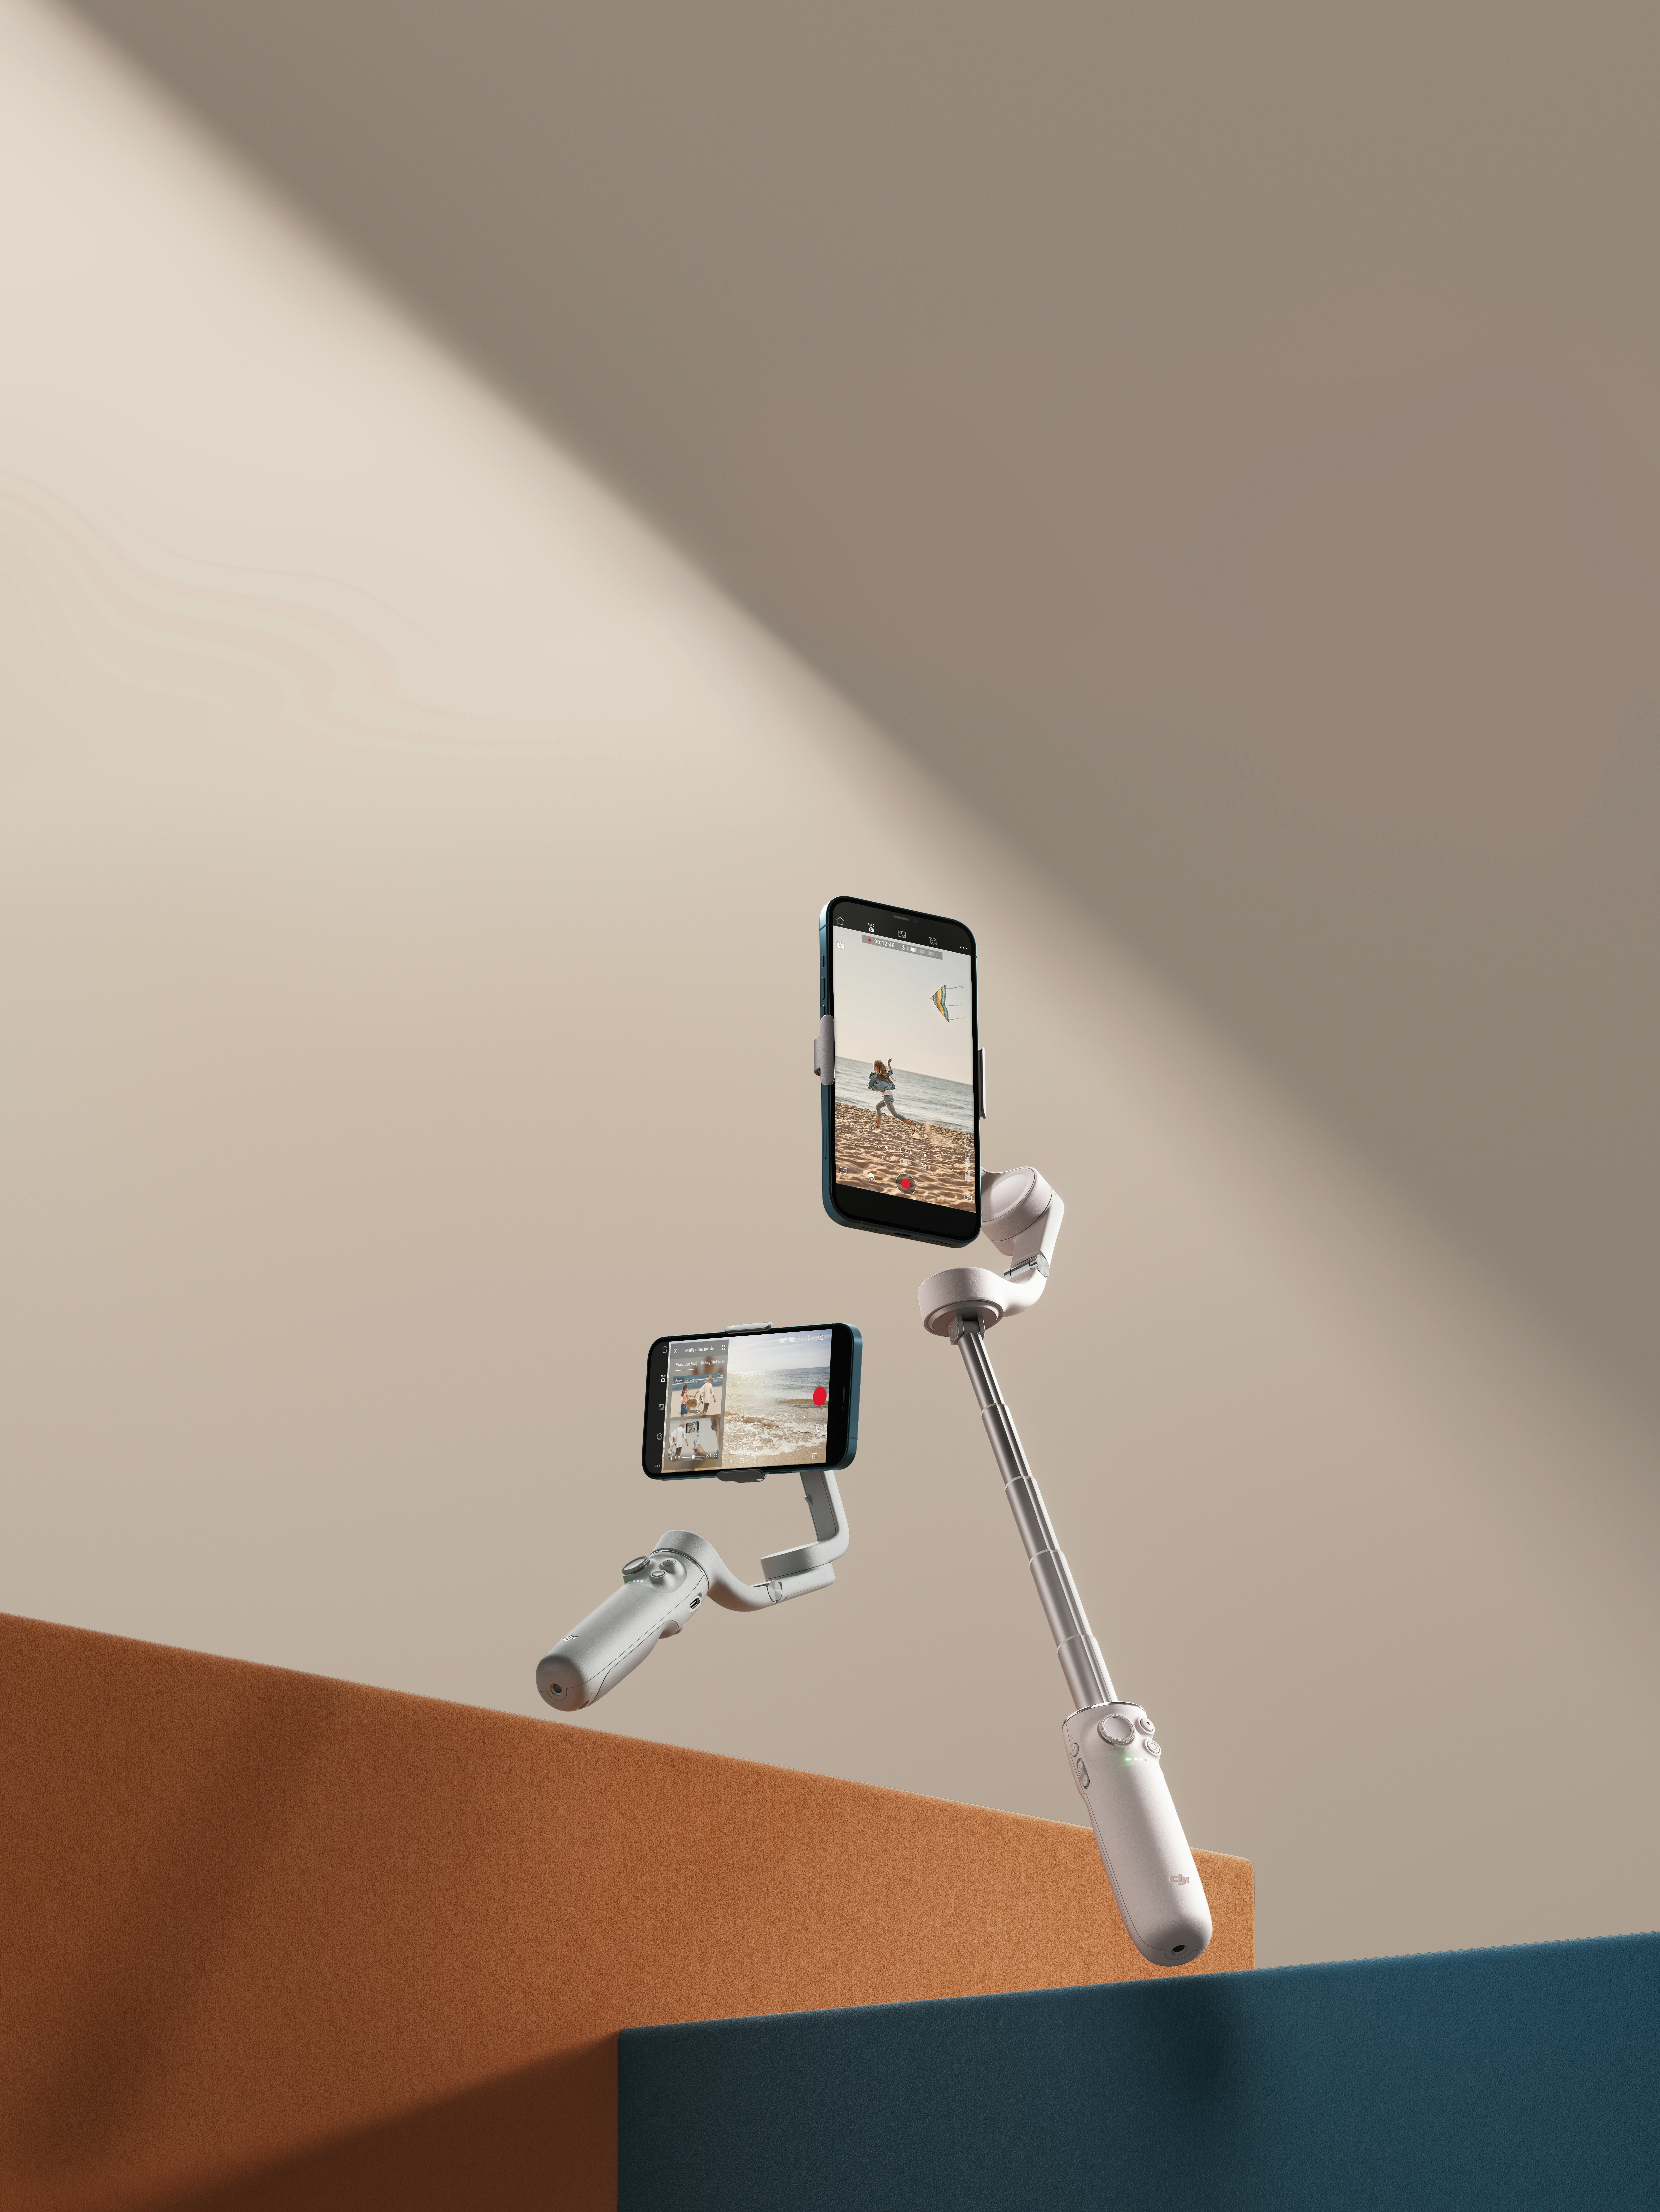 DJI Osmo Mobile 5 gimbal price, release date, comparison with OM4